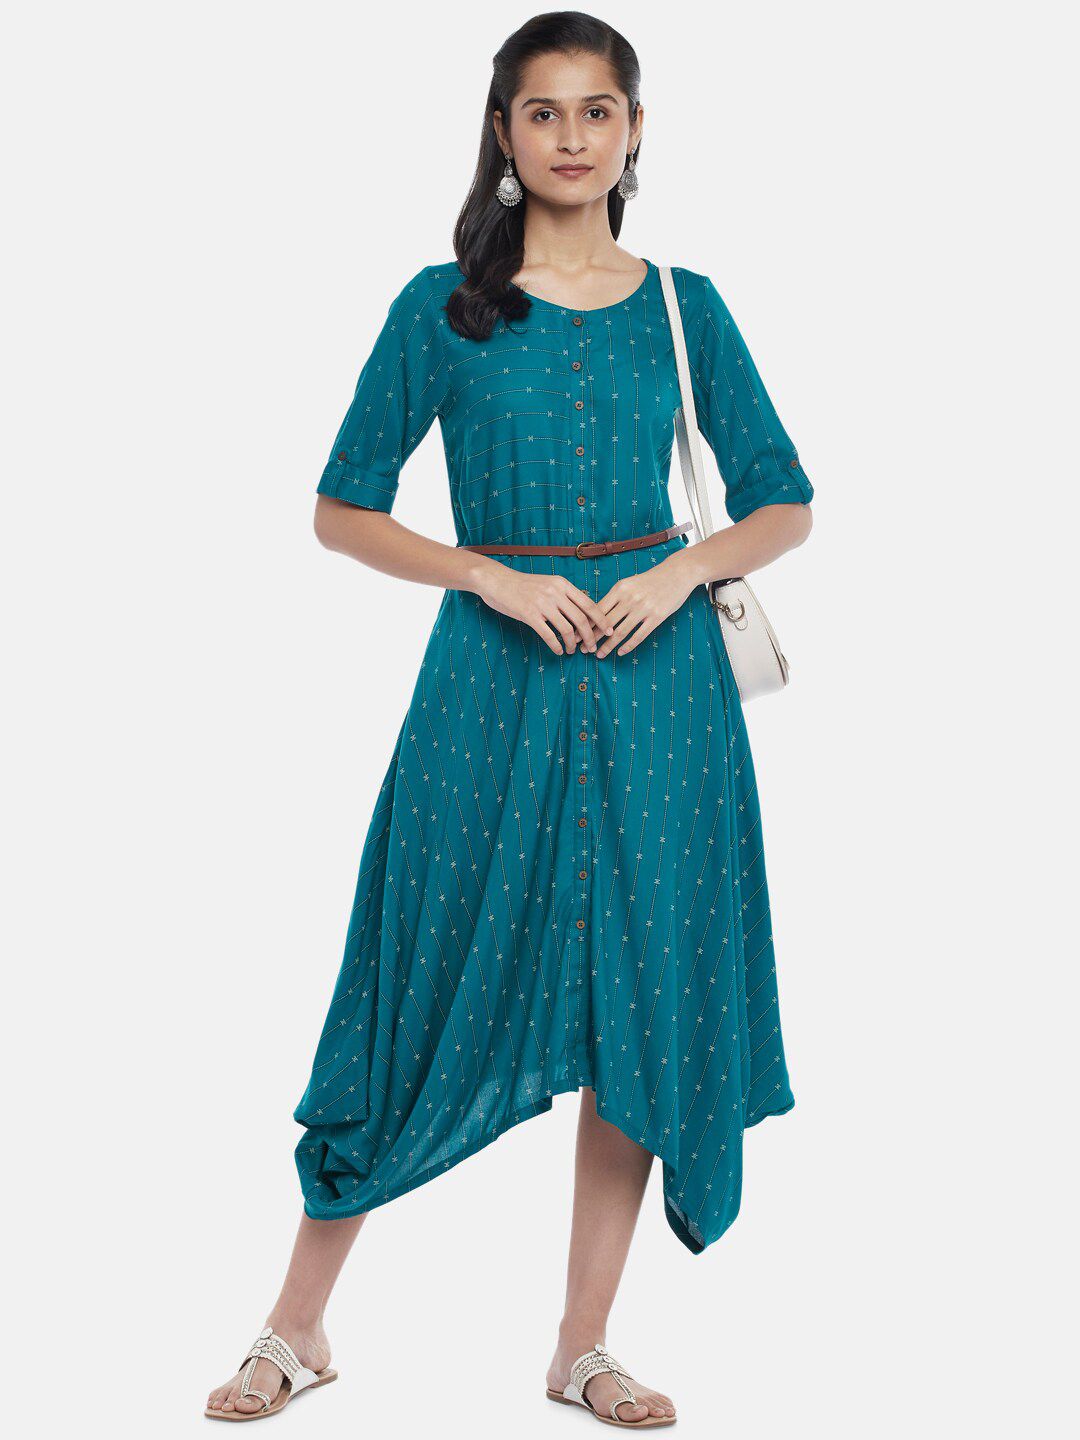 AKKRITI BY PANTALOONS Teal Midi Belted Dress Price in India